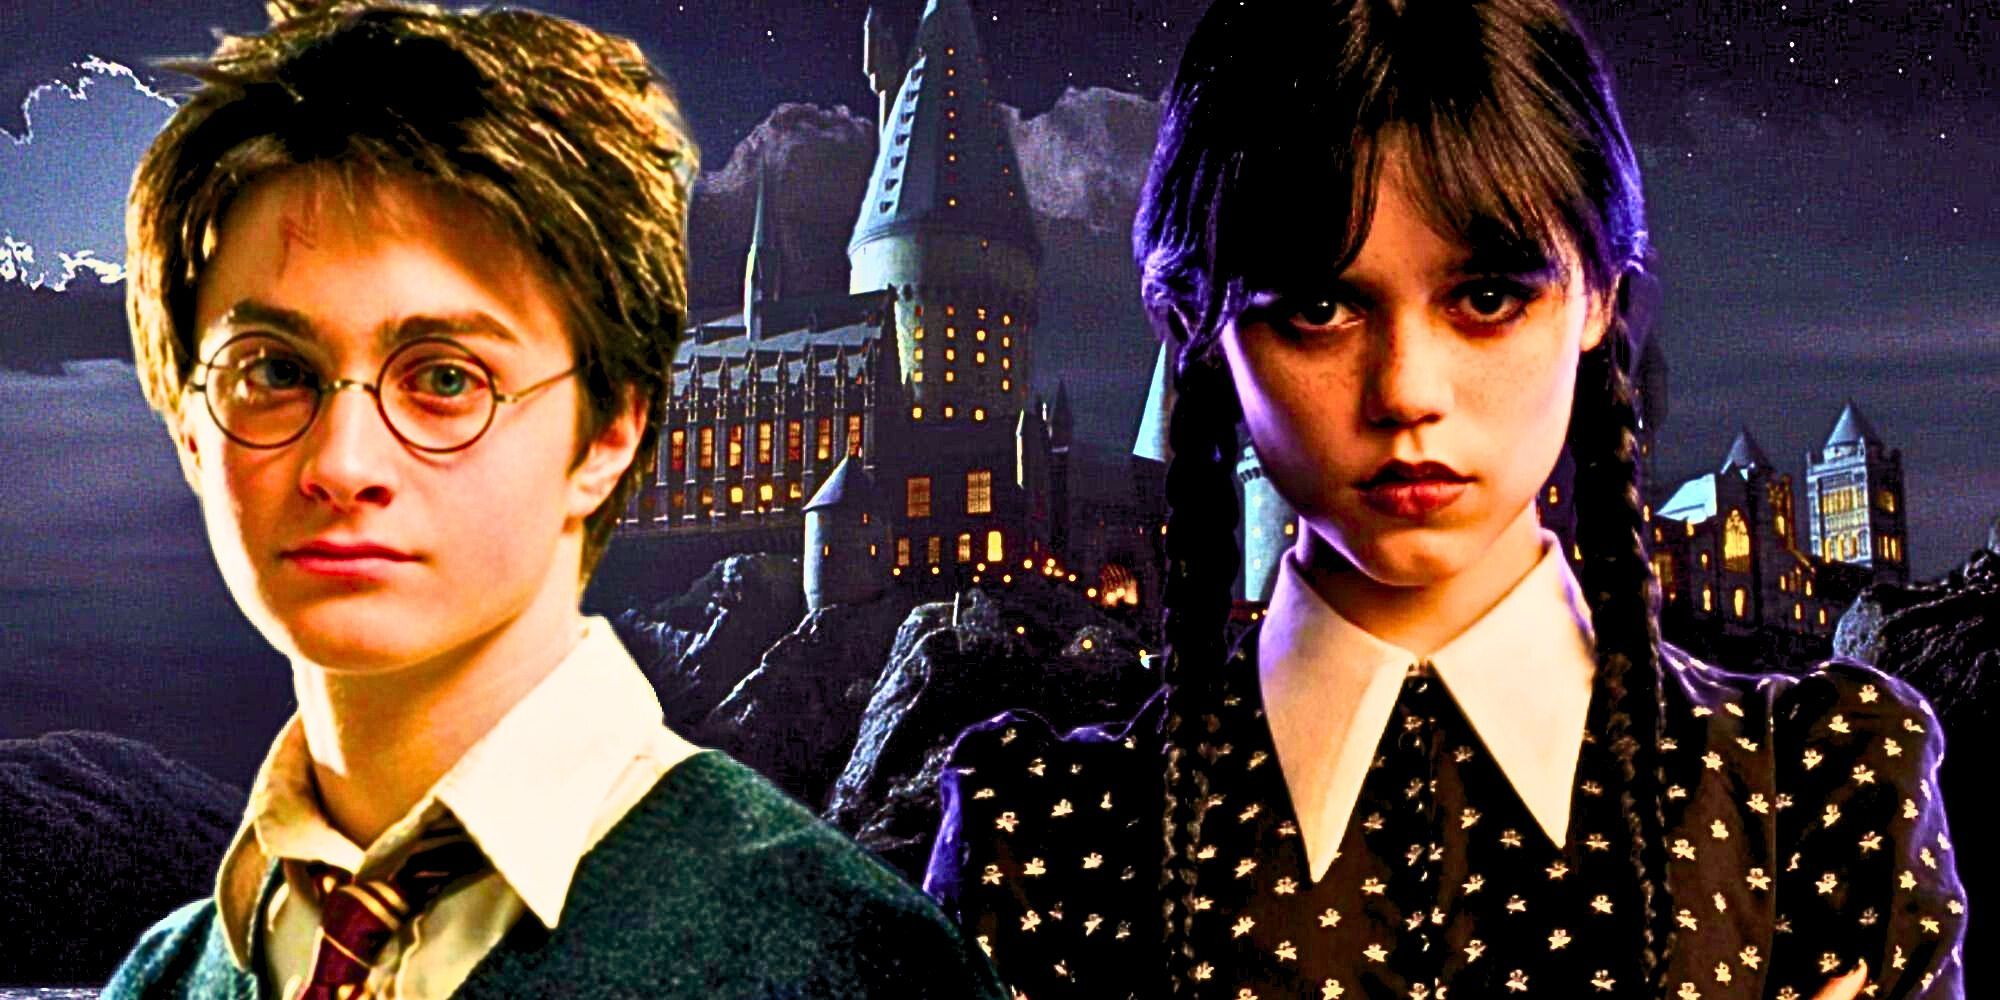 Images of Daniel Radcliffe as Harry Potter and Jenna Ortega as Wednesday Addams against Hogwarts Castle